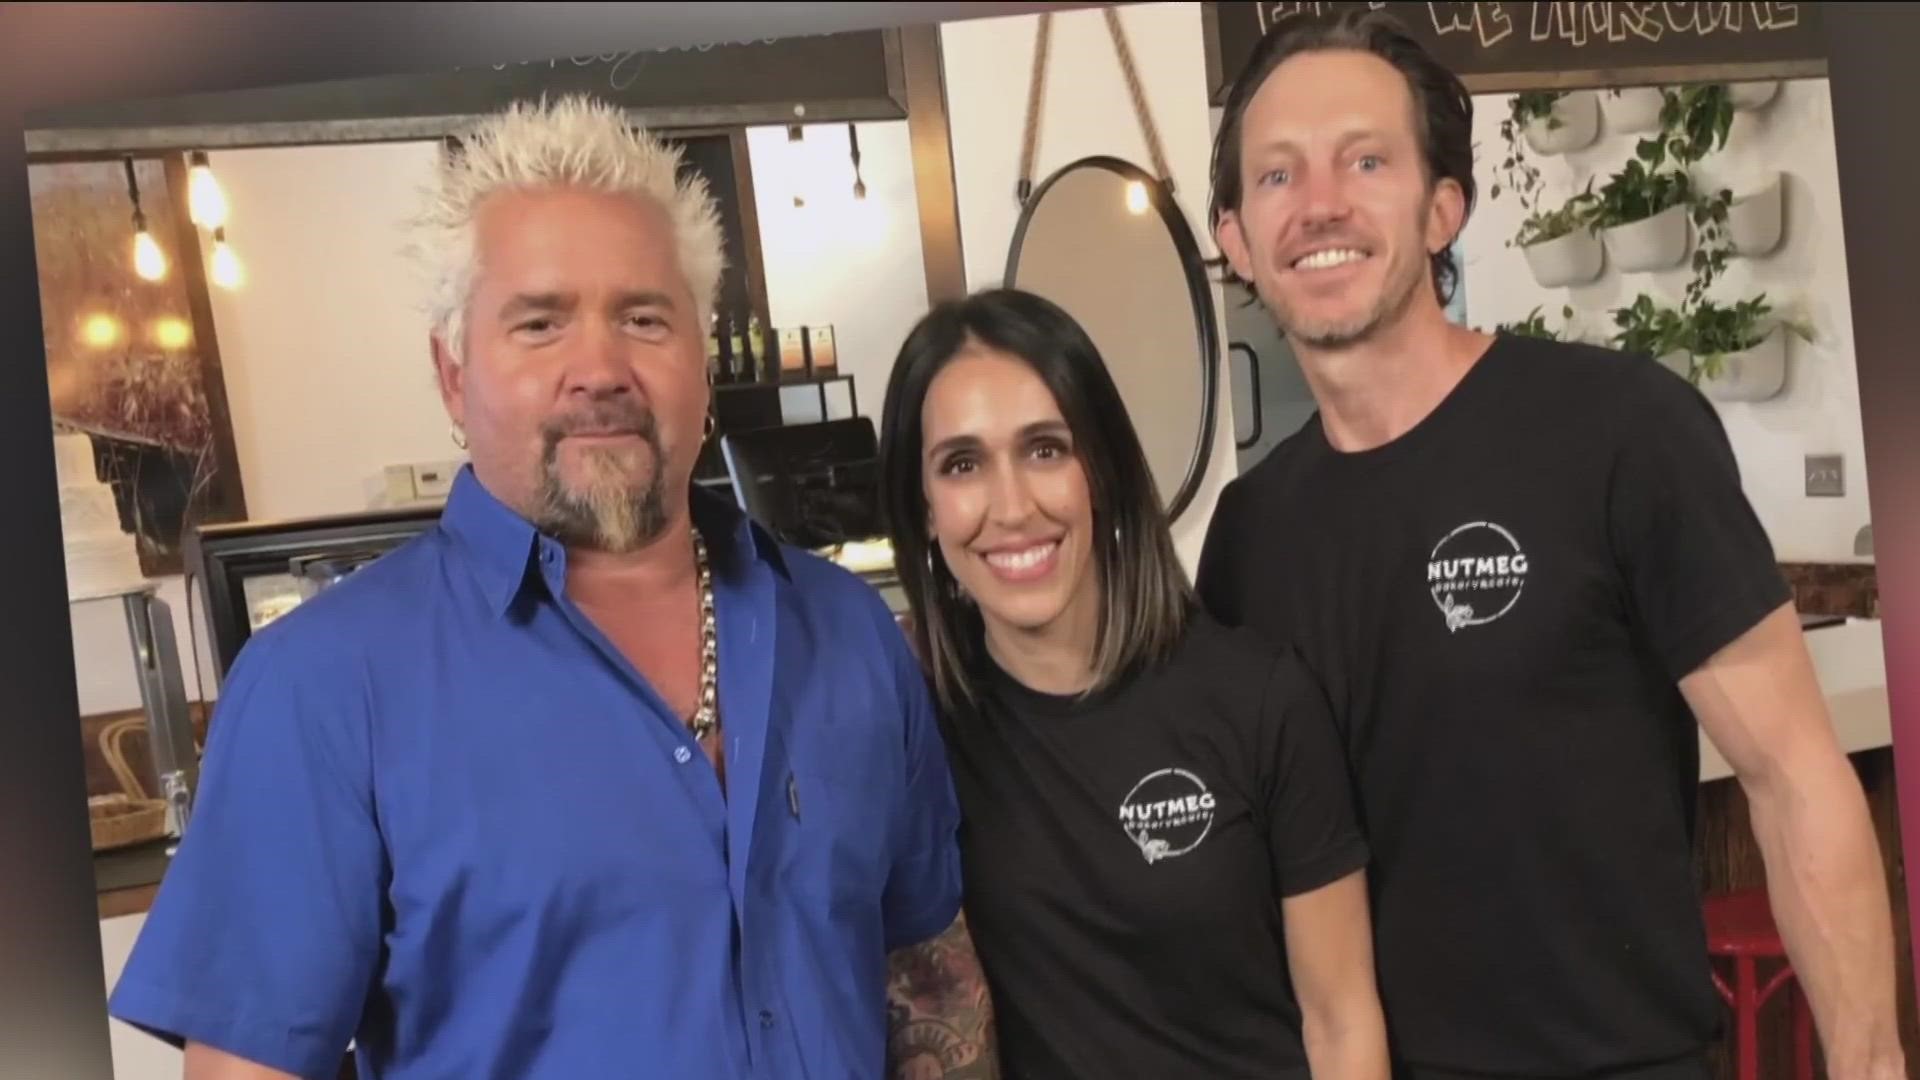 New customers visiting day after celebrity chef featured cafe on Diners, Drive-Ins and Dives.